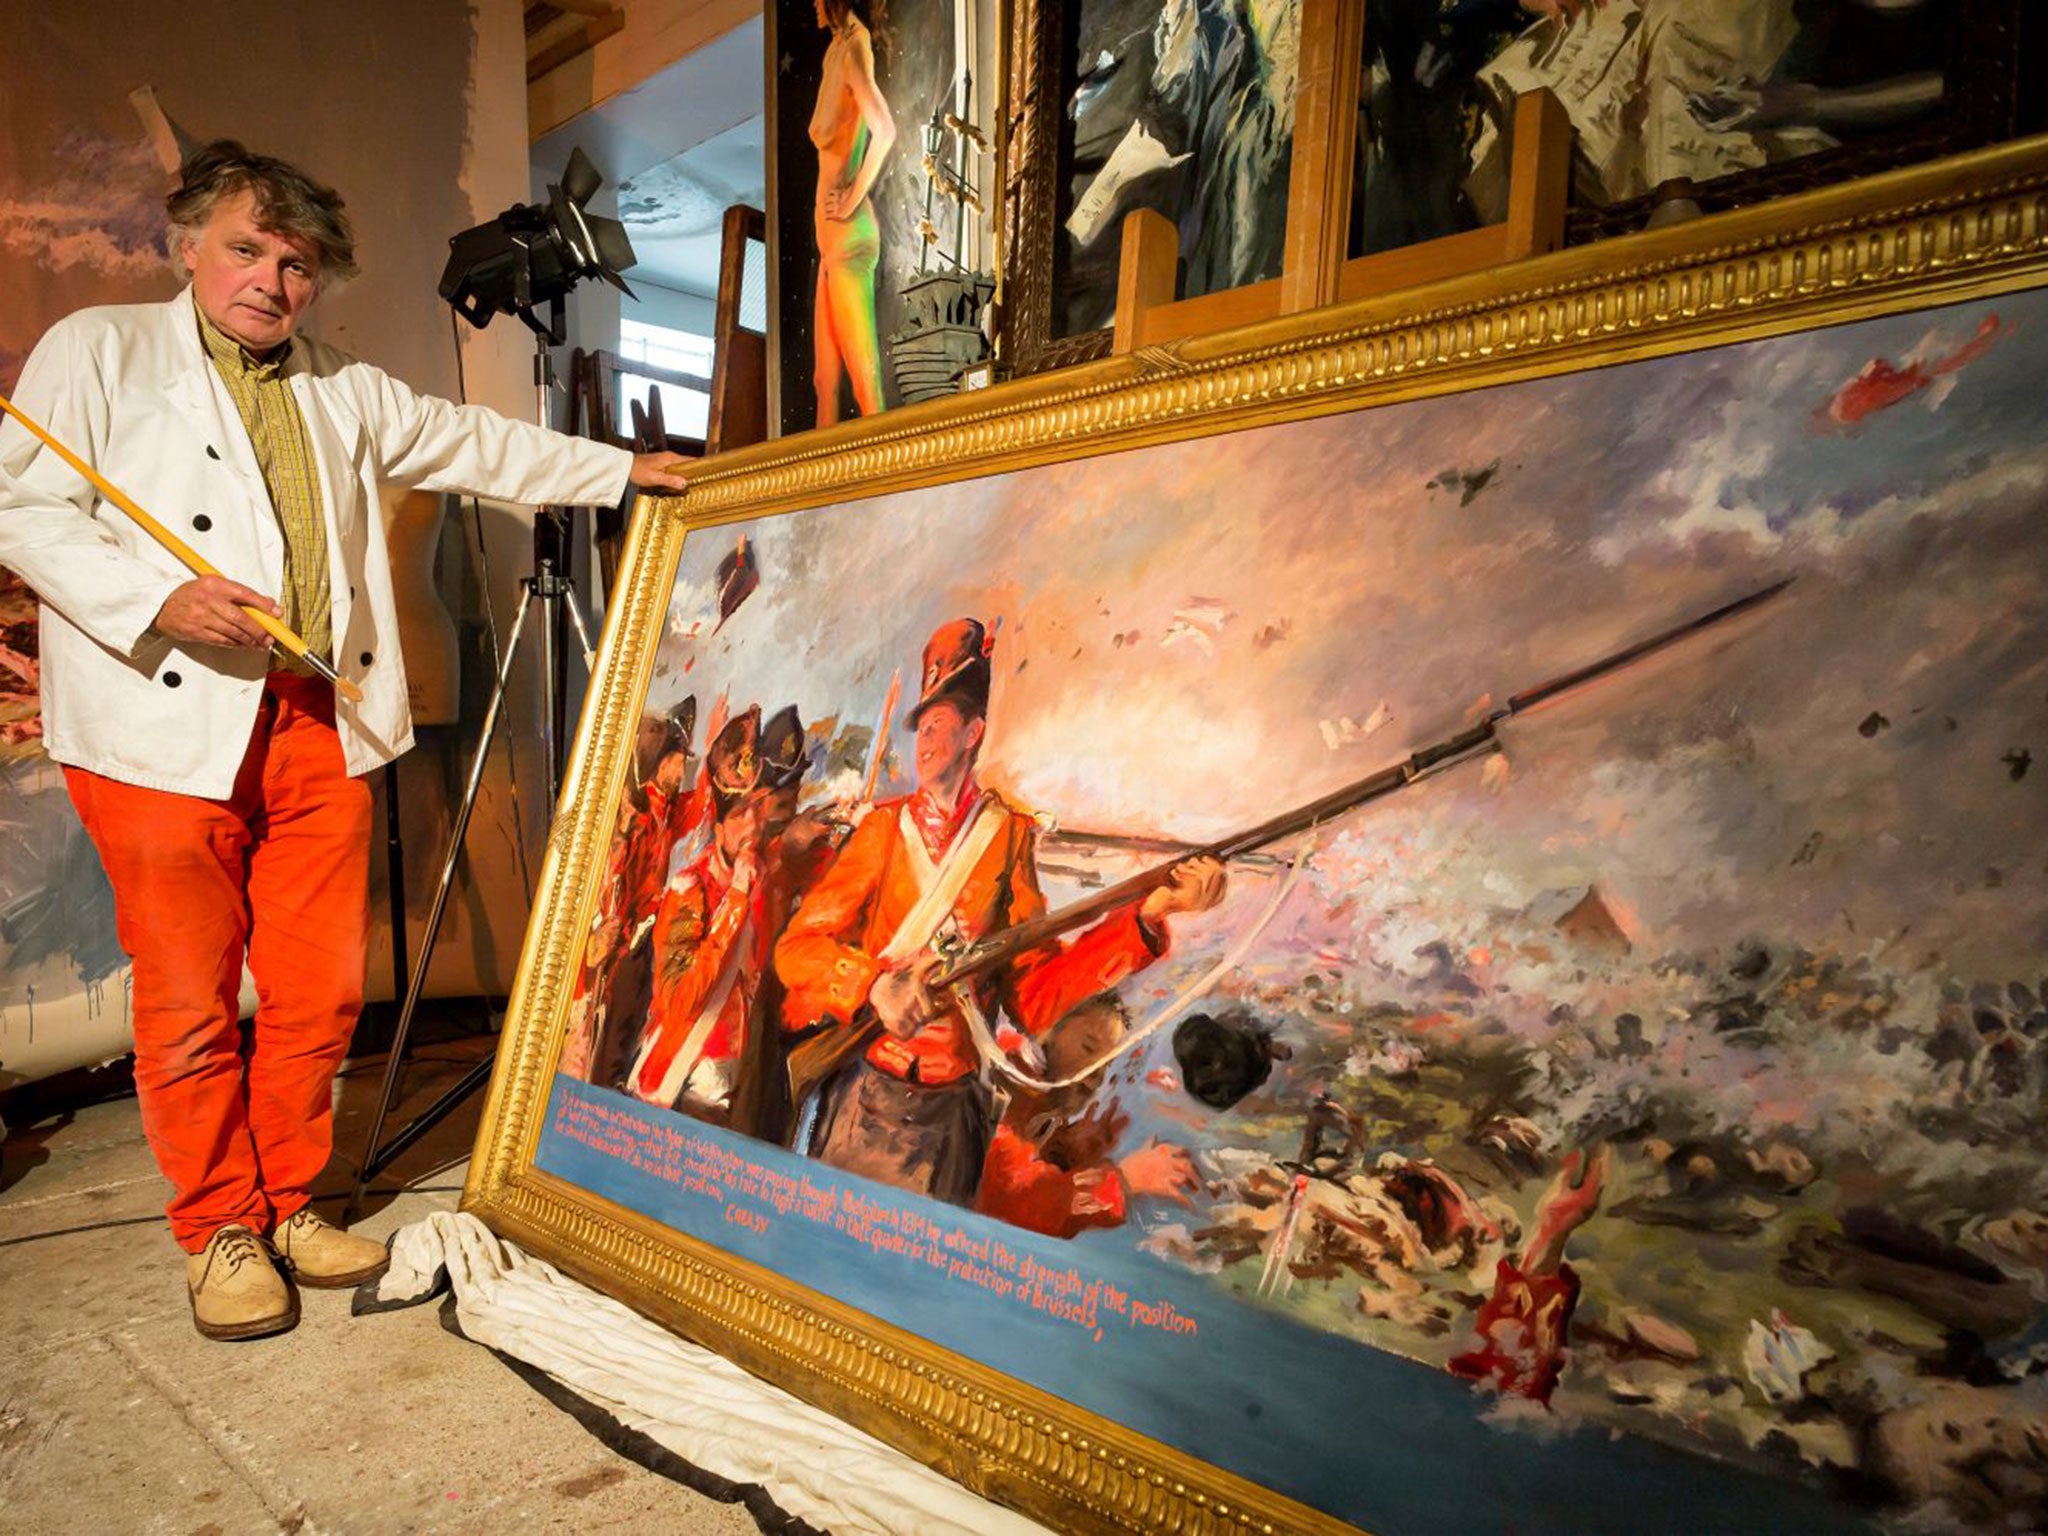 Howard Morgan in his studio, with his official painting for the 200th anniversary of the battle of Waterloo